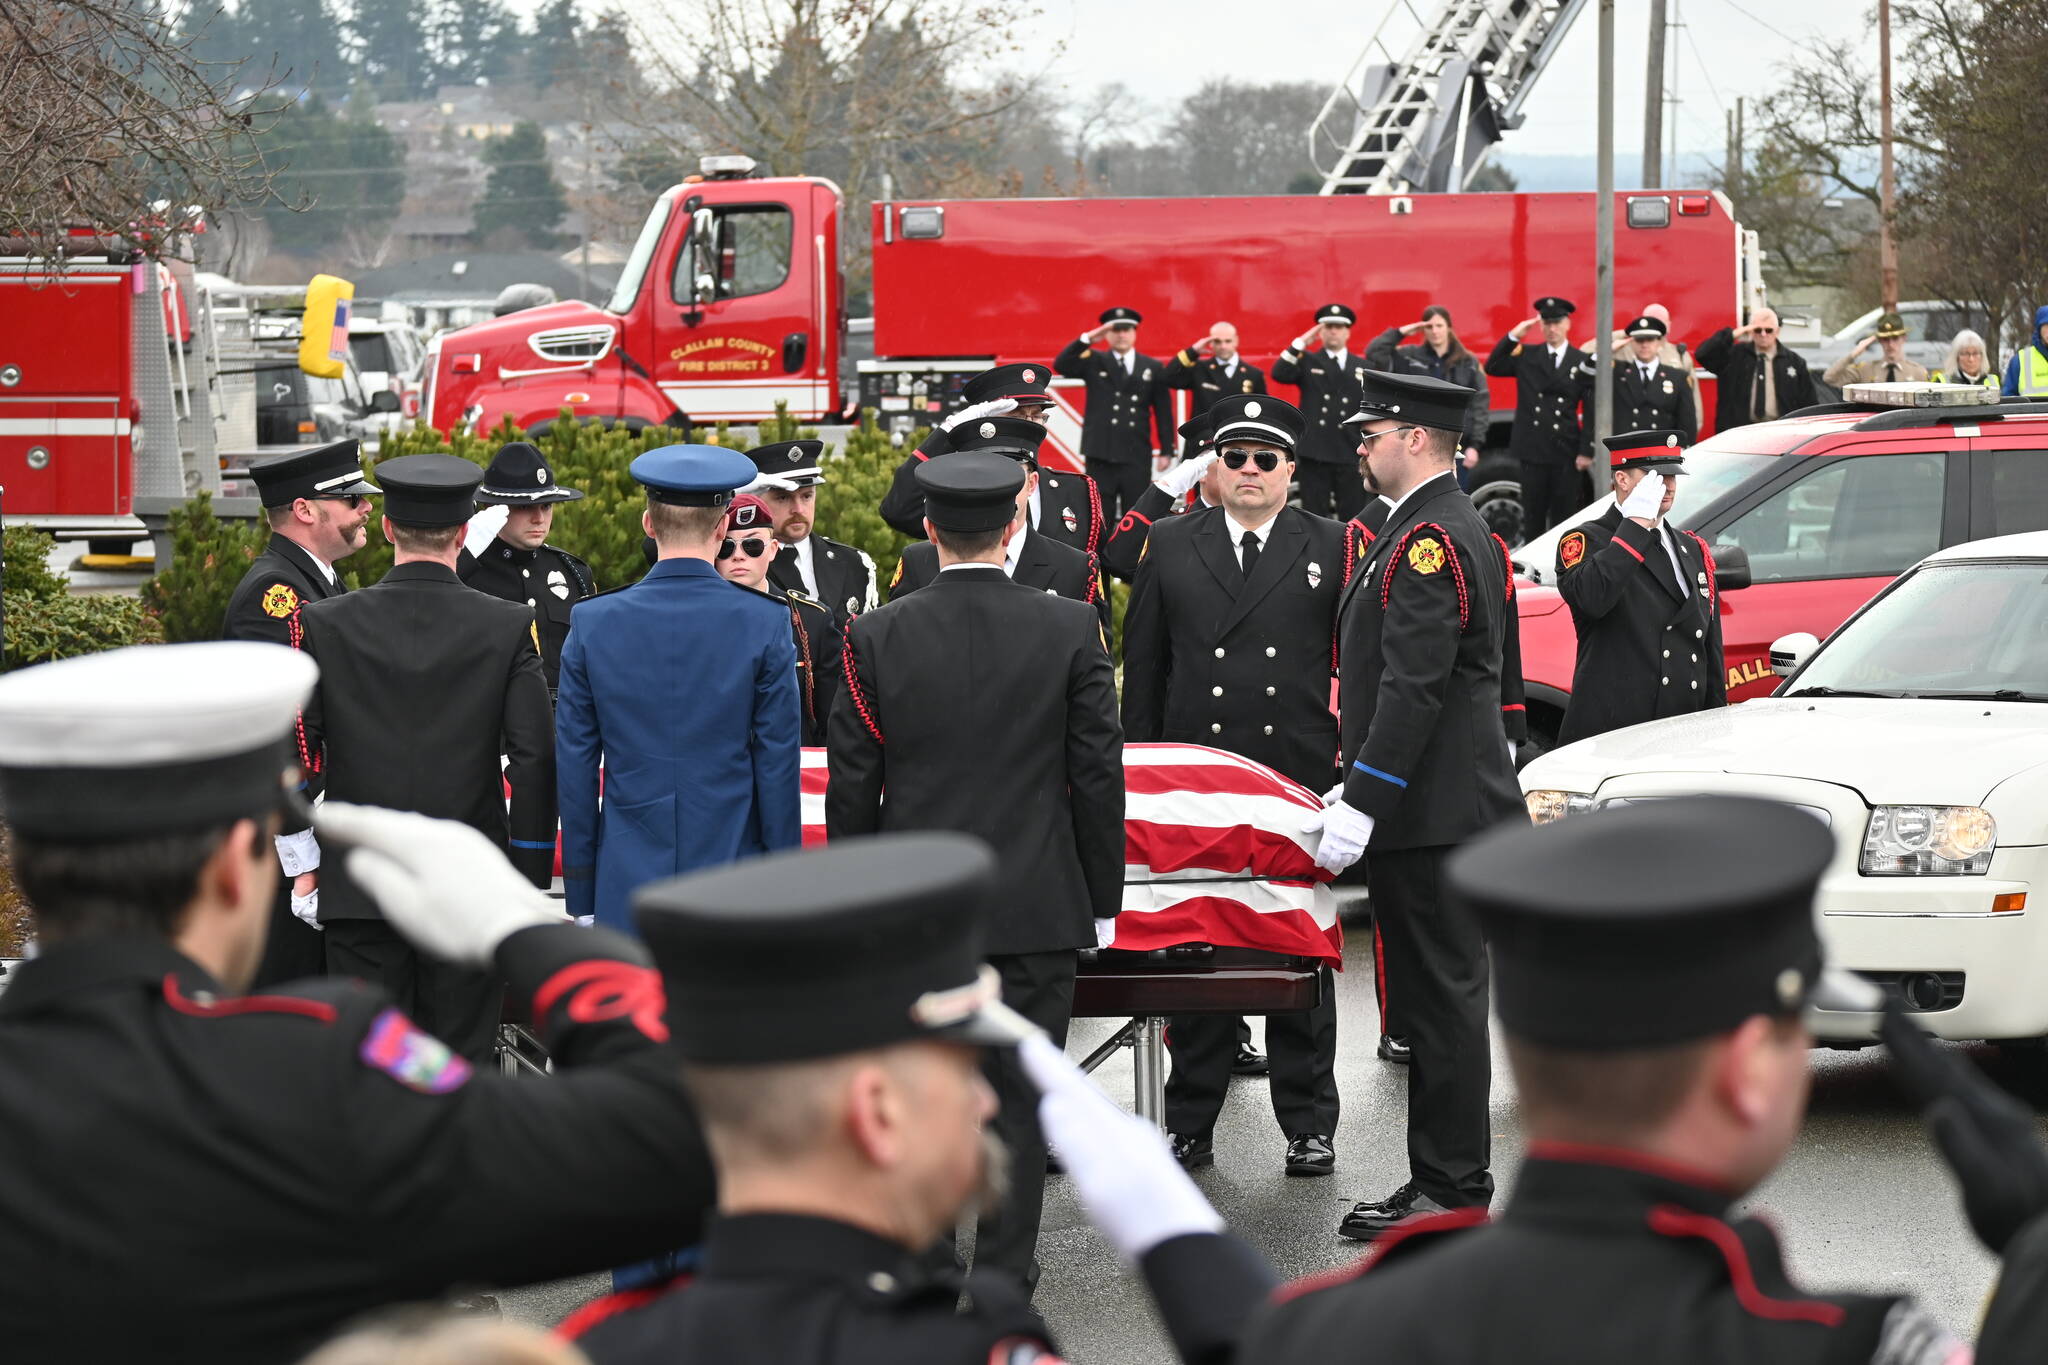 Sequim Gazette photo by Michael Dashiell / Firefighters pay tribute to Capt. Charles “Chad” Cate at a memorial service at Sequim High School on Jan. 21.